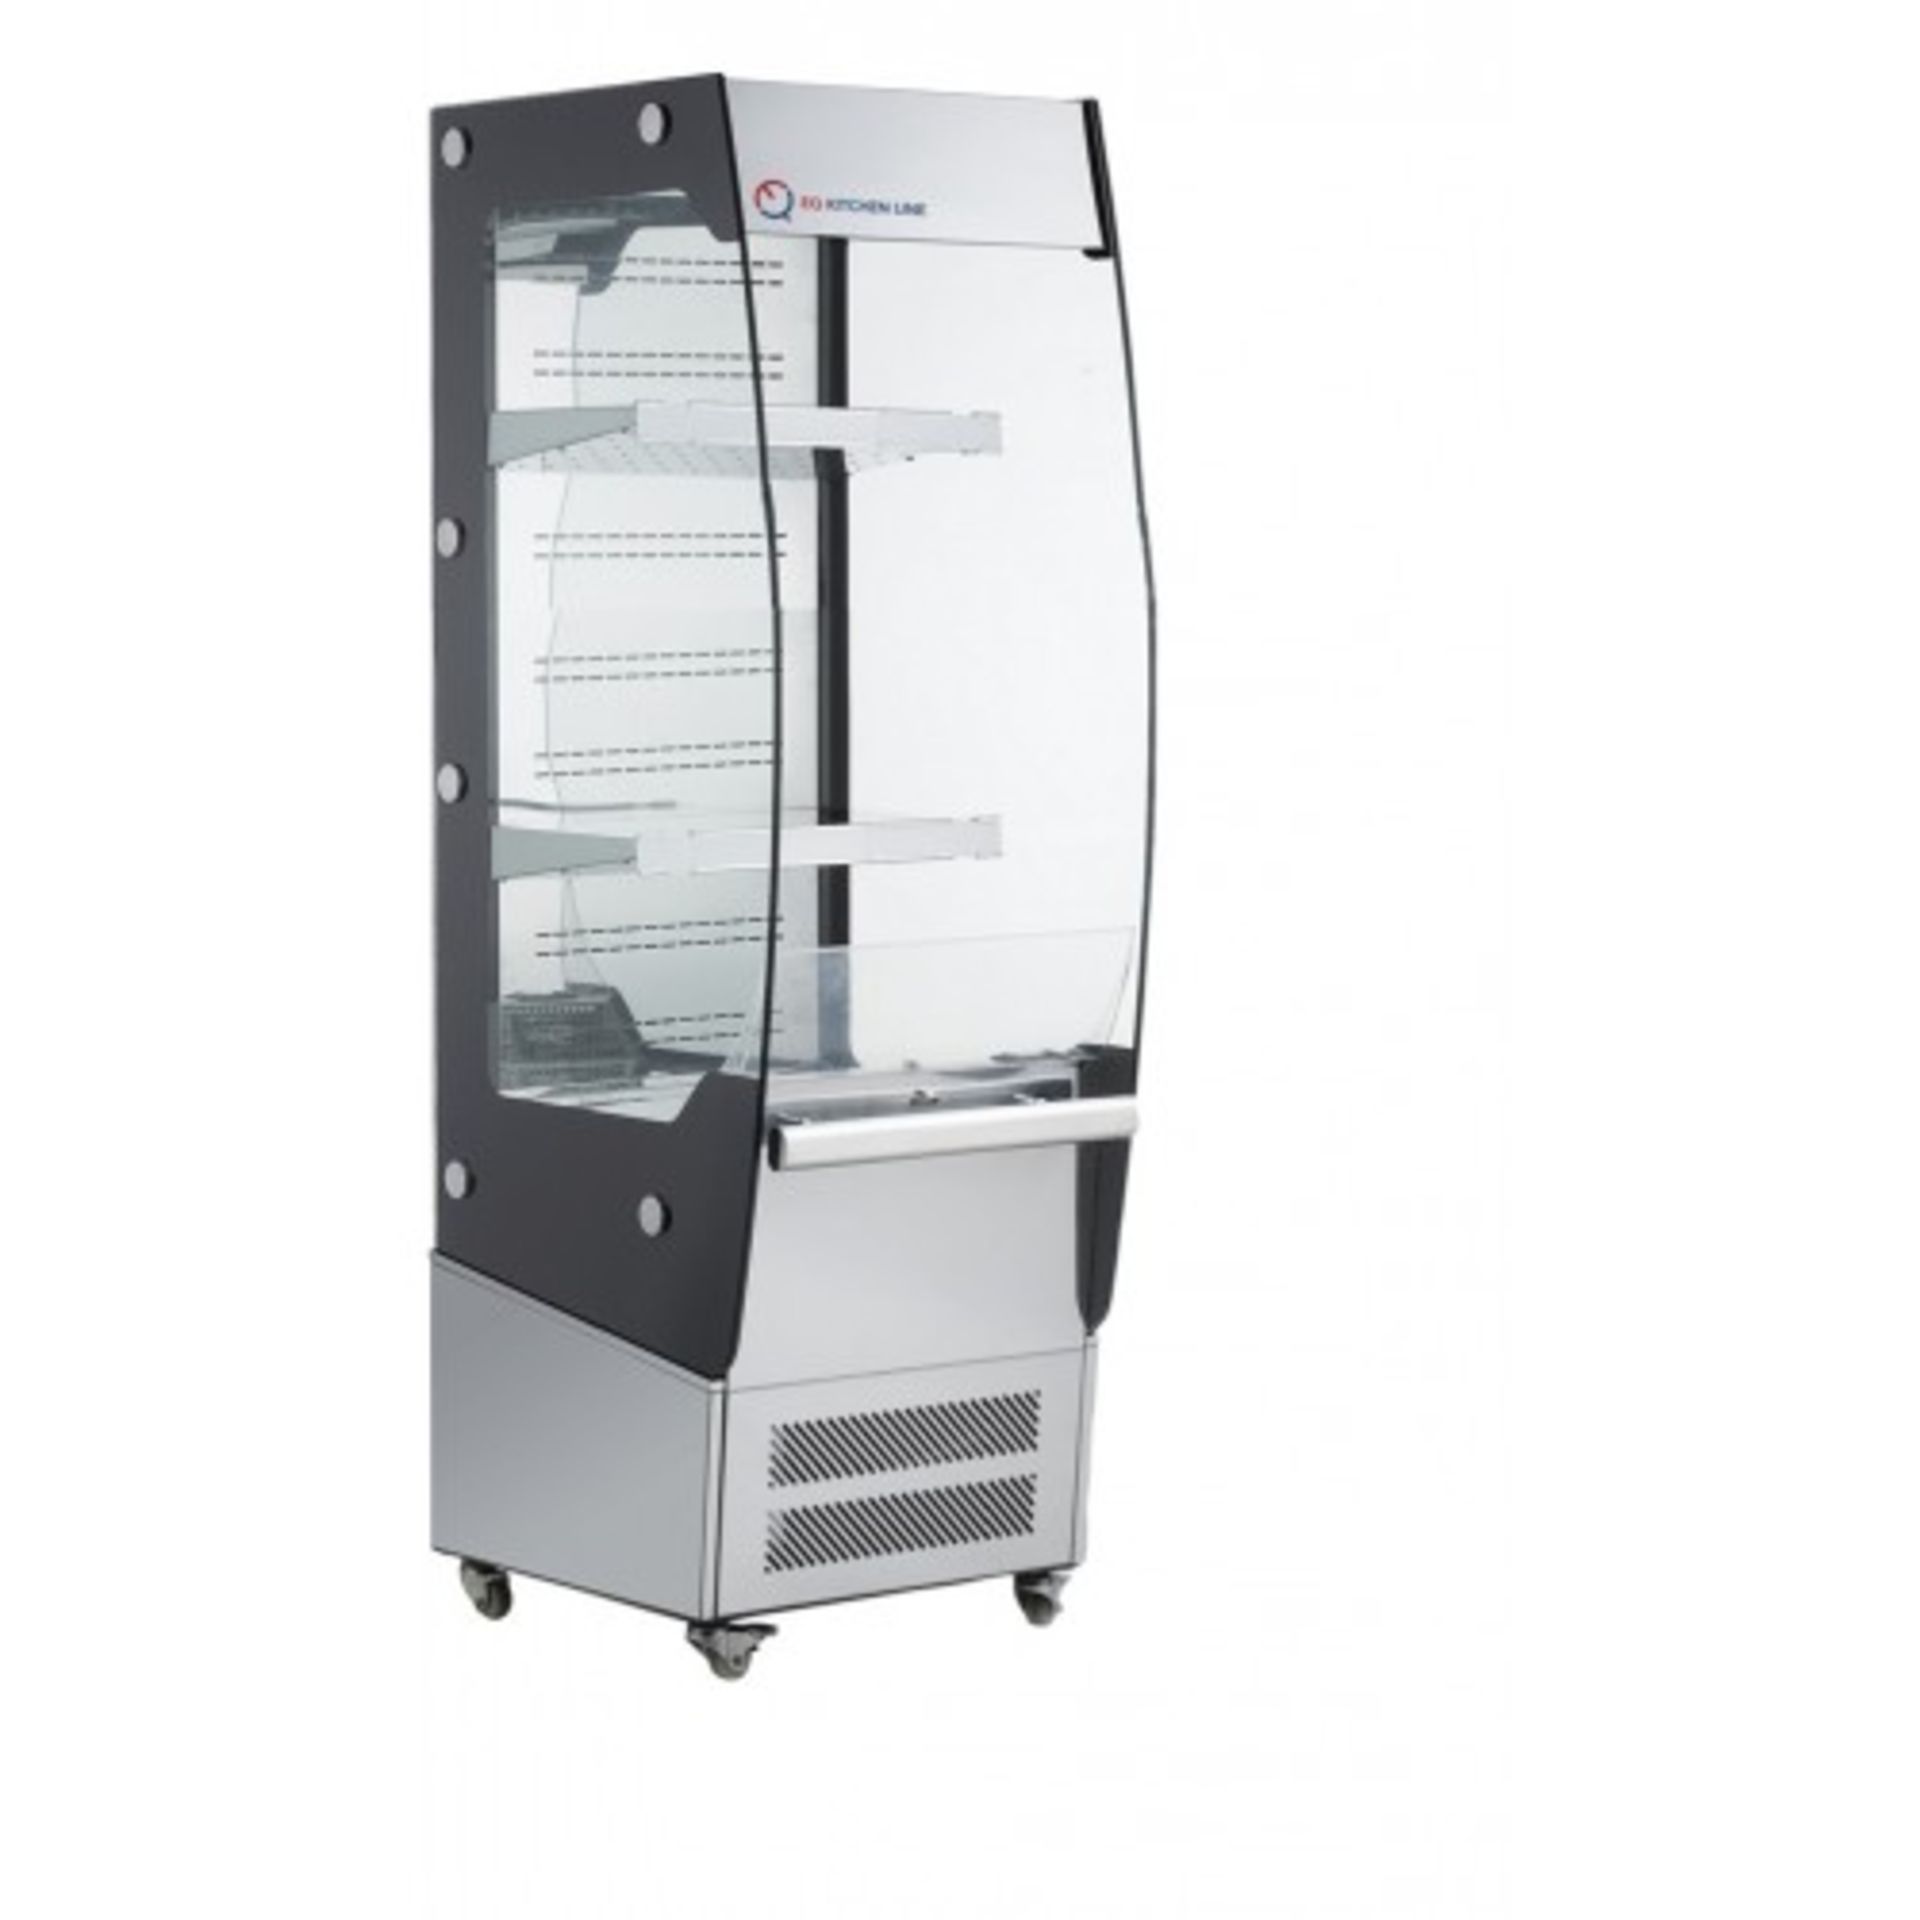 REFRIGERATED OPEN  DISPLAY CASE 57 INCH HIGH MODEL RTS-180 L